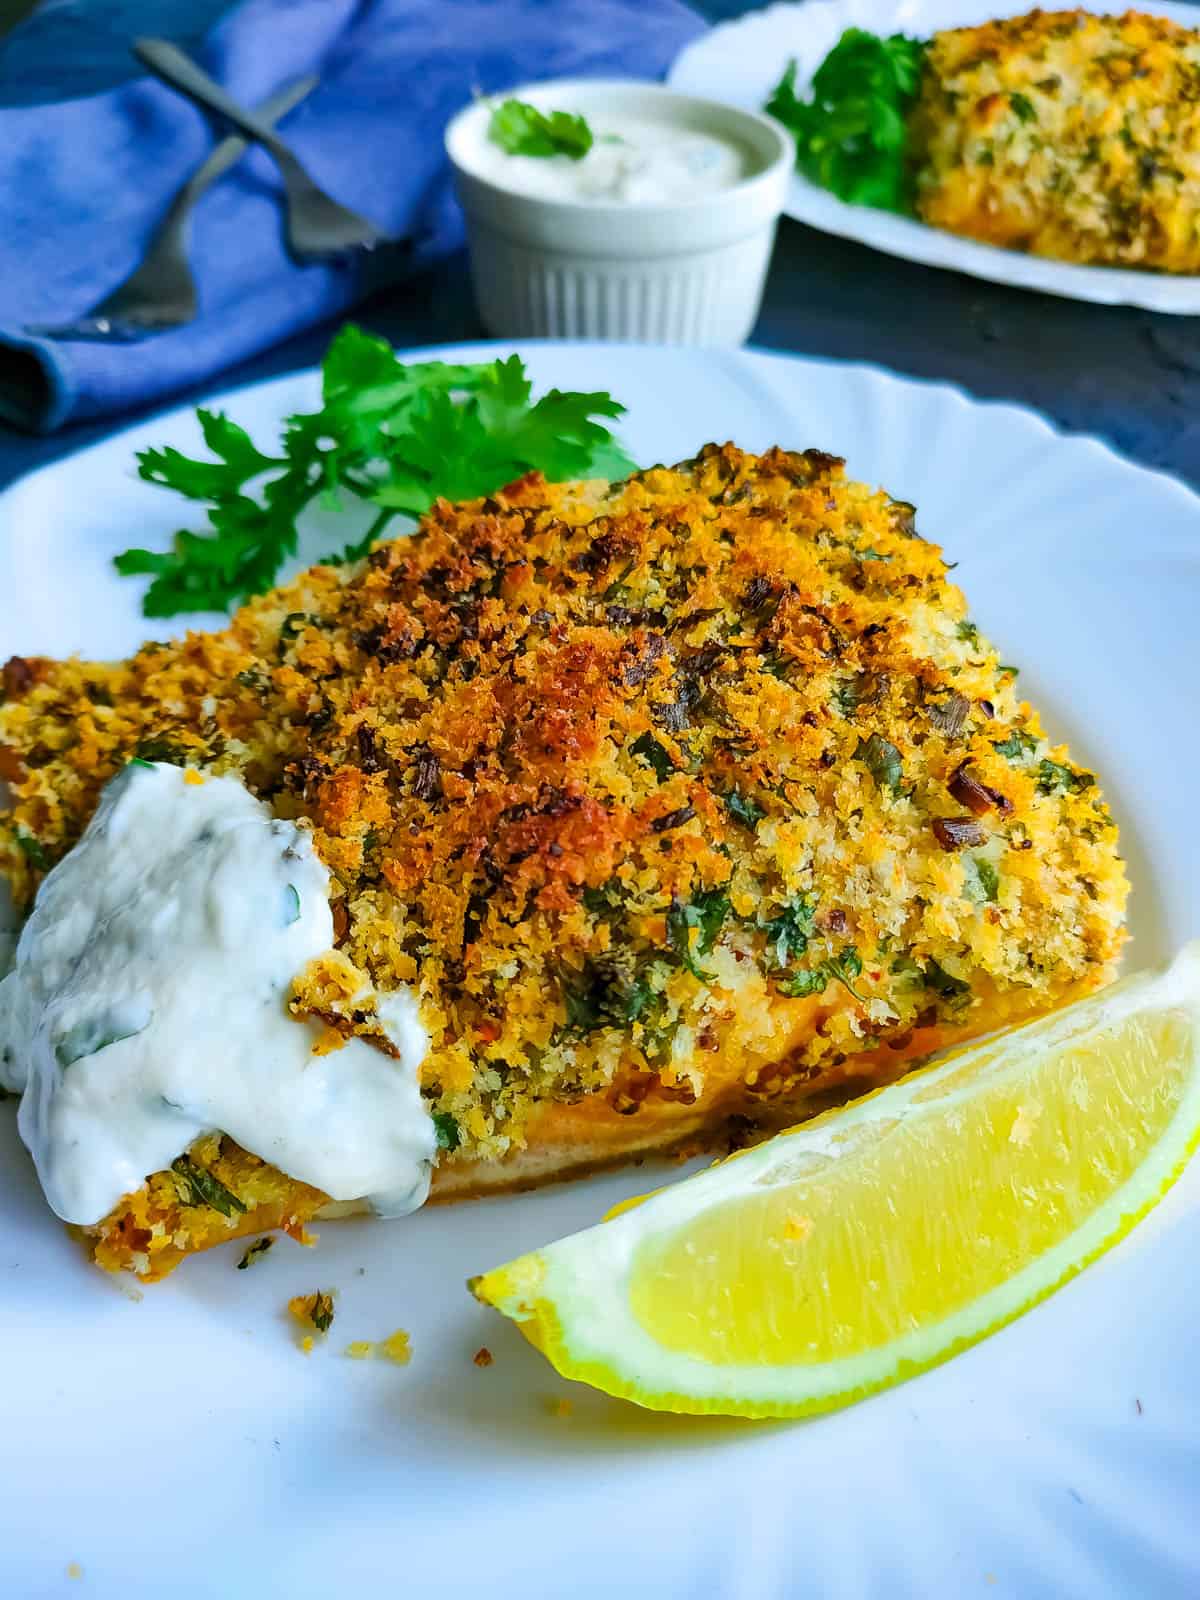 Baked panko fish with yogurt sauce and garnished with parsley and lemon slices on a white plate.